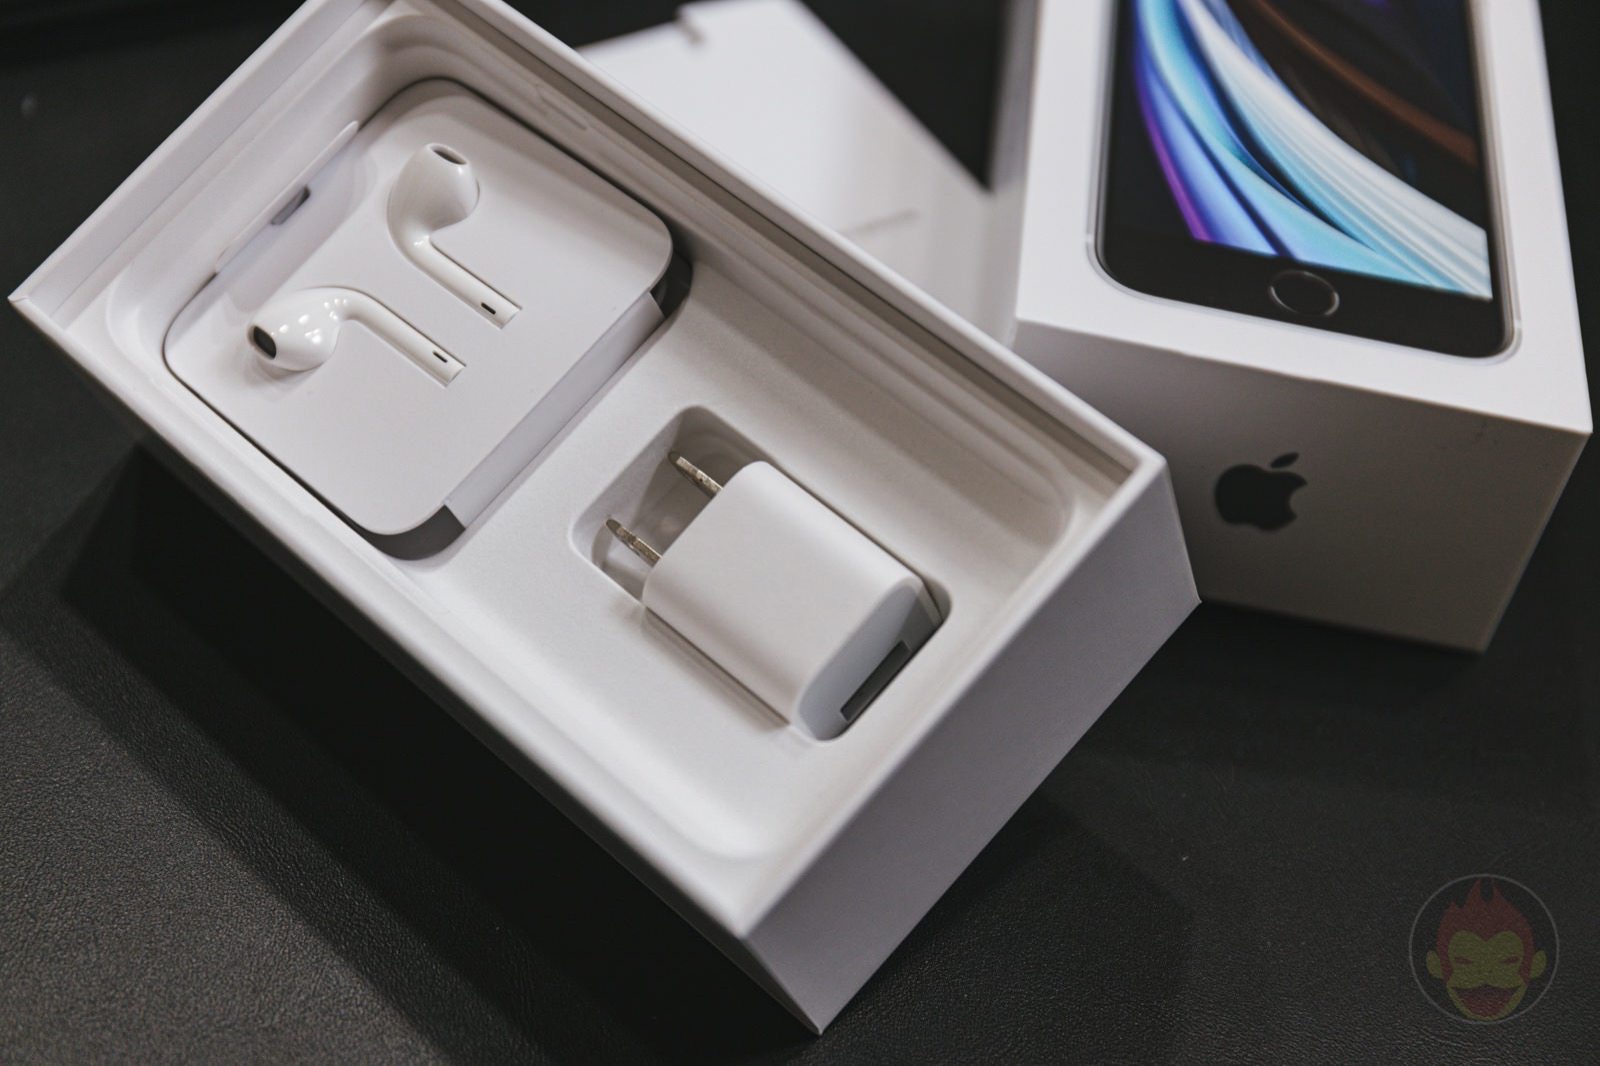 Iphone package box earphones charger 07